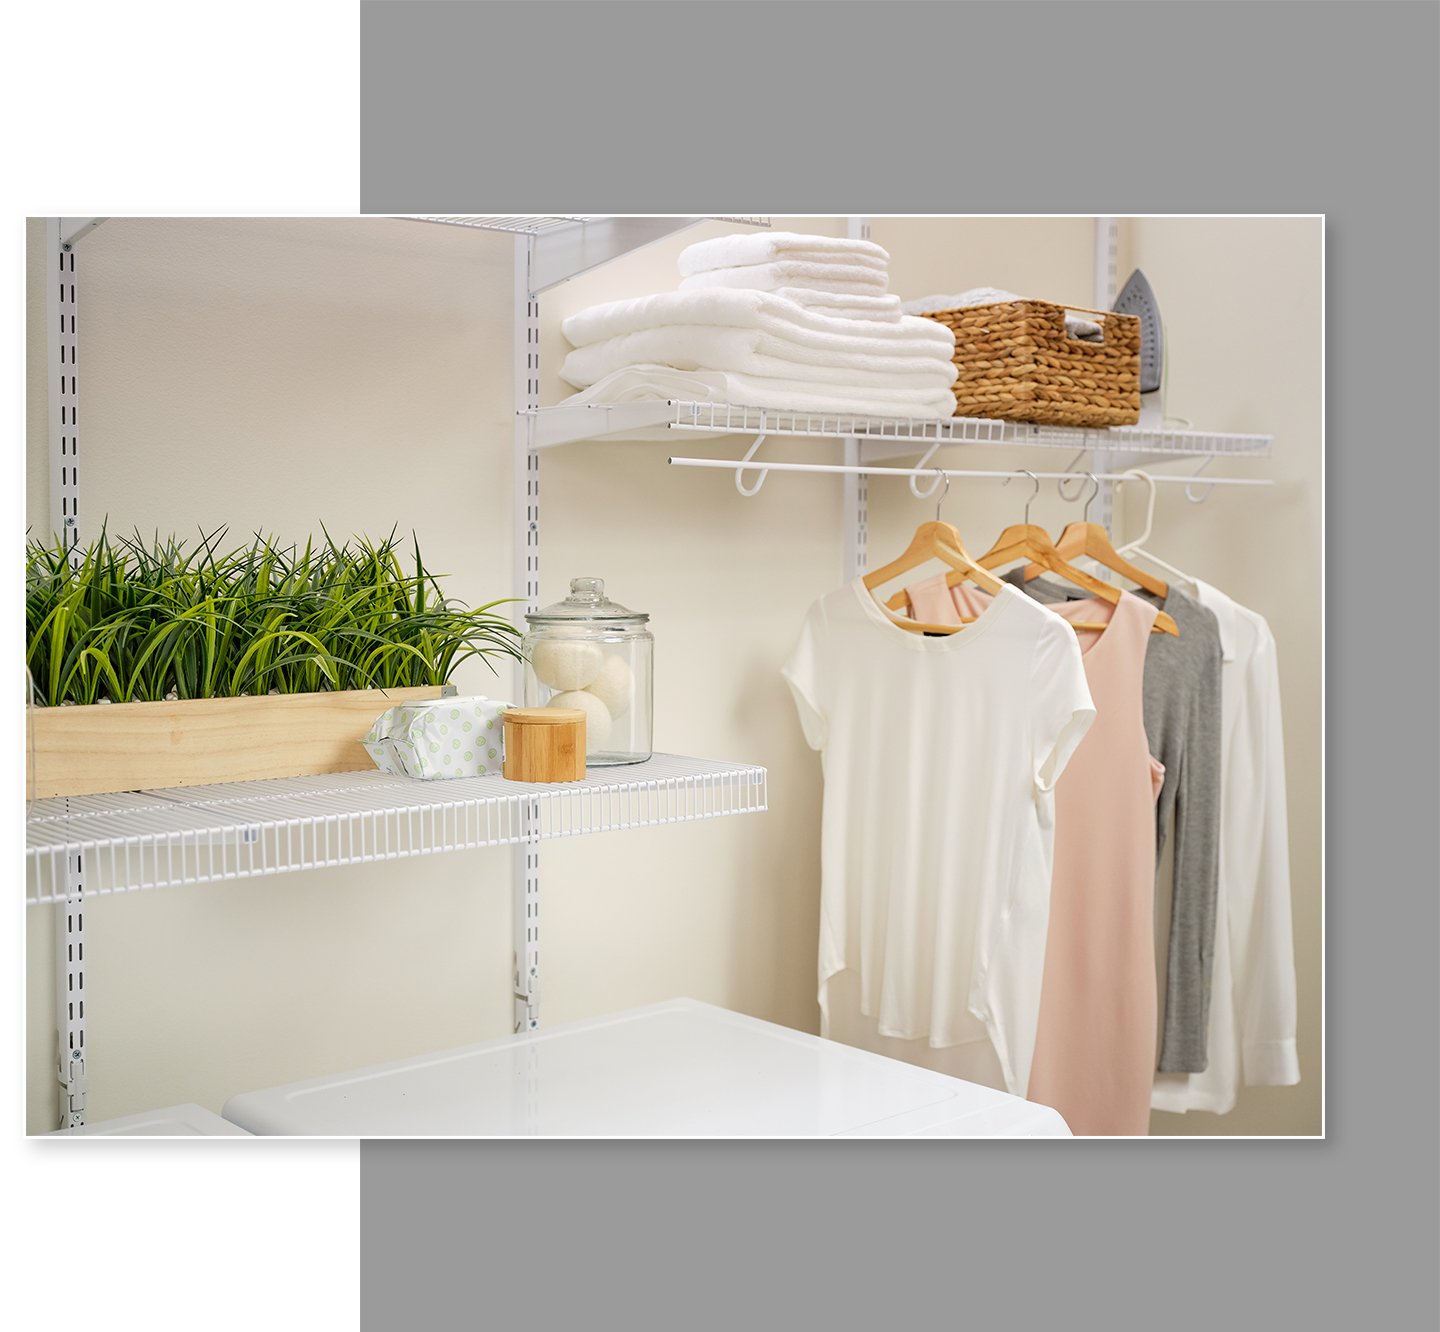 Fasttrack Closet Organization Systems, Rubbermaid Track Shelving System